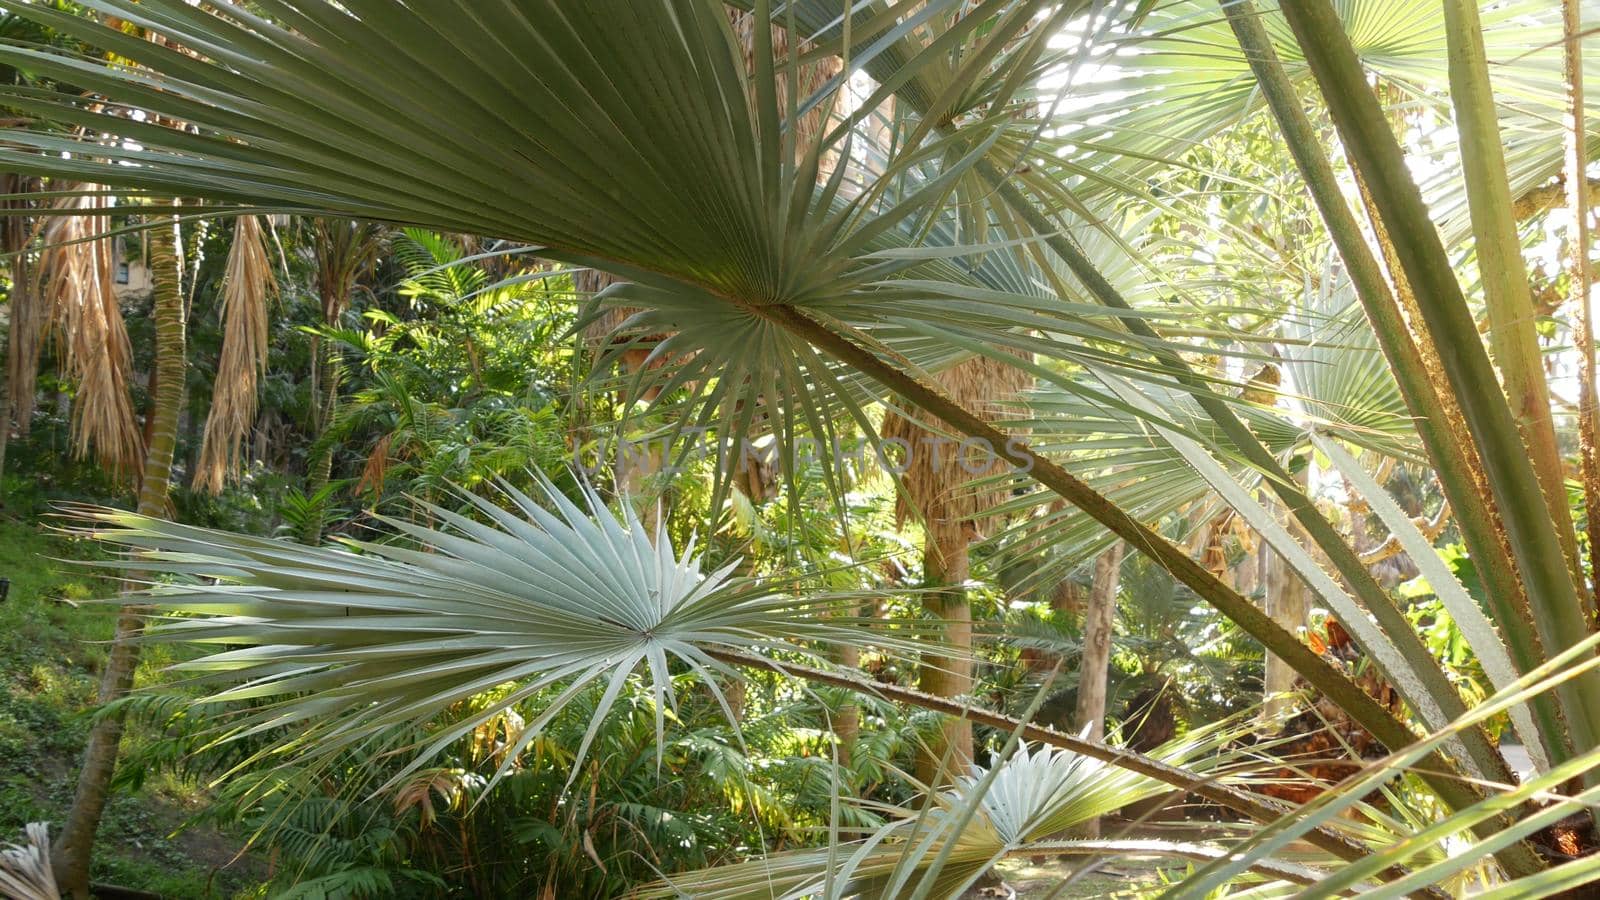 Juicy lush foliage of tropical trees in sunny jungle forest or exotic amazon rainforest, botanical paradise greenery. Leaves of plants. Palm trees of palm canyon trail in sunlight, desert oasis nature